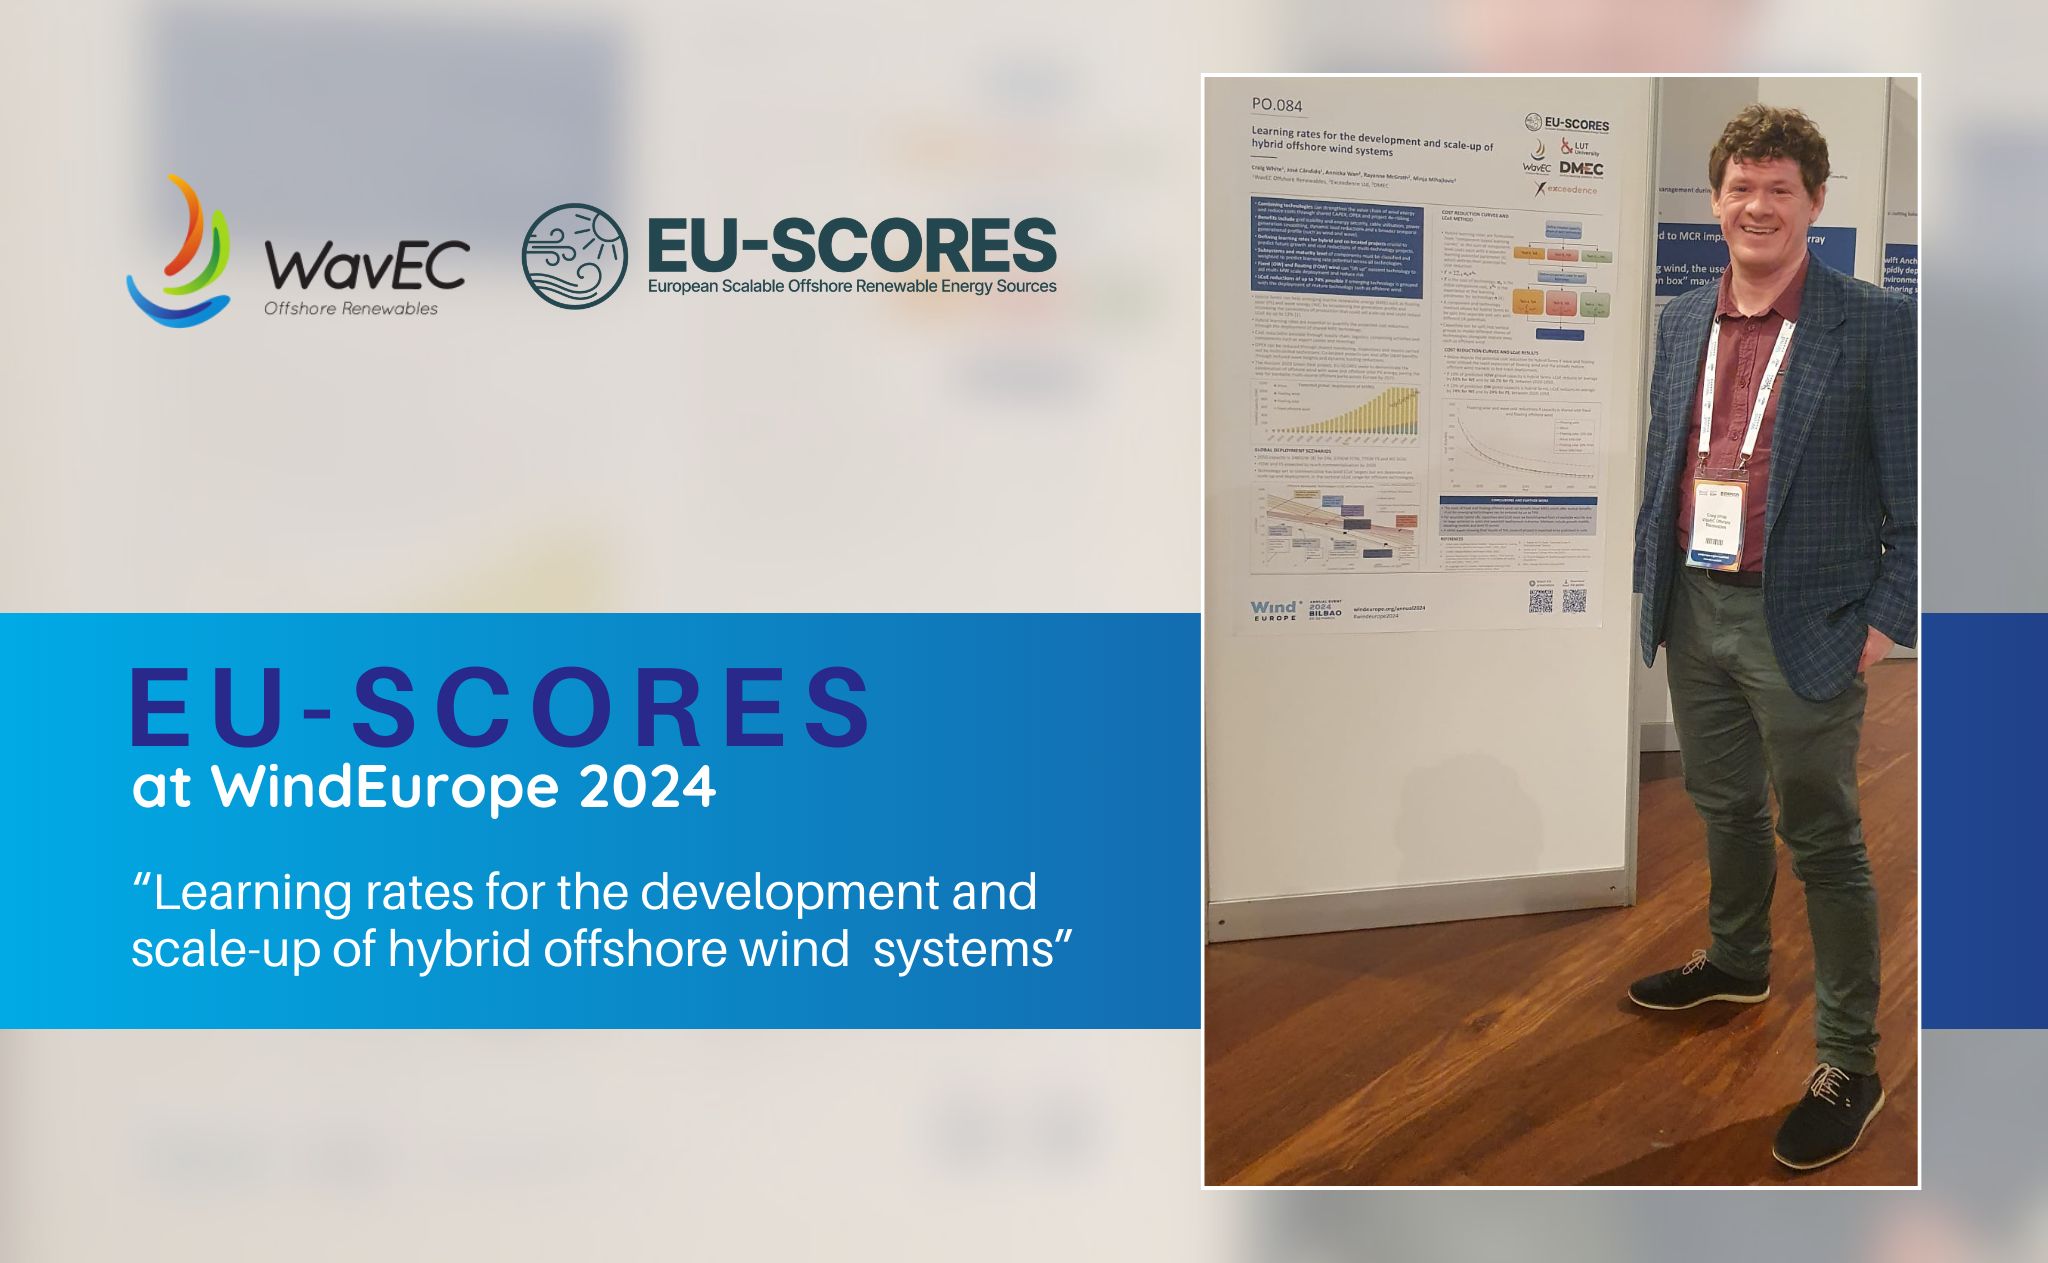 Newsbild-WindEurope Poster: Learning rates for the development and scale-up of hybrid offshore wind systems